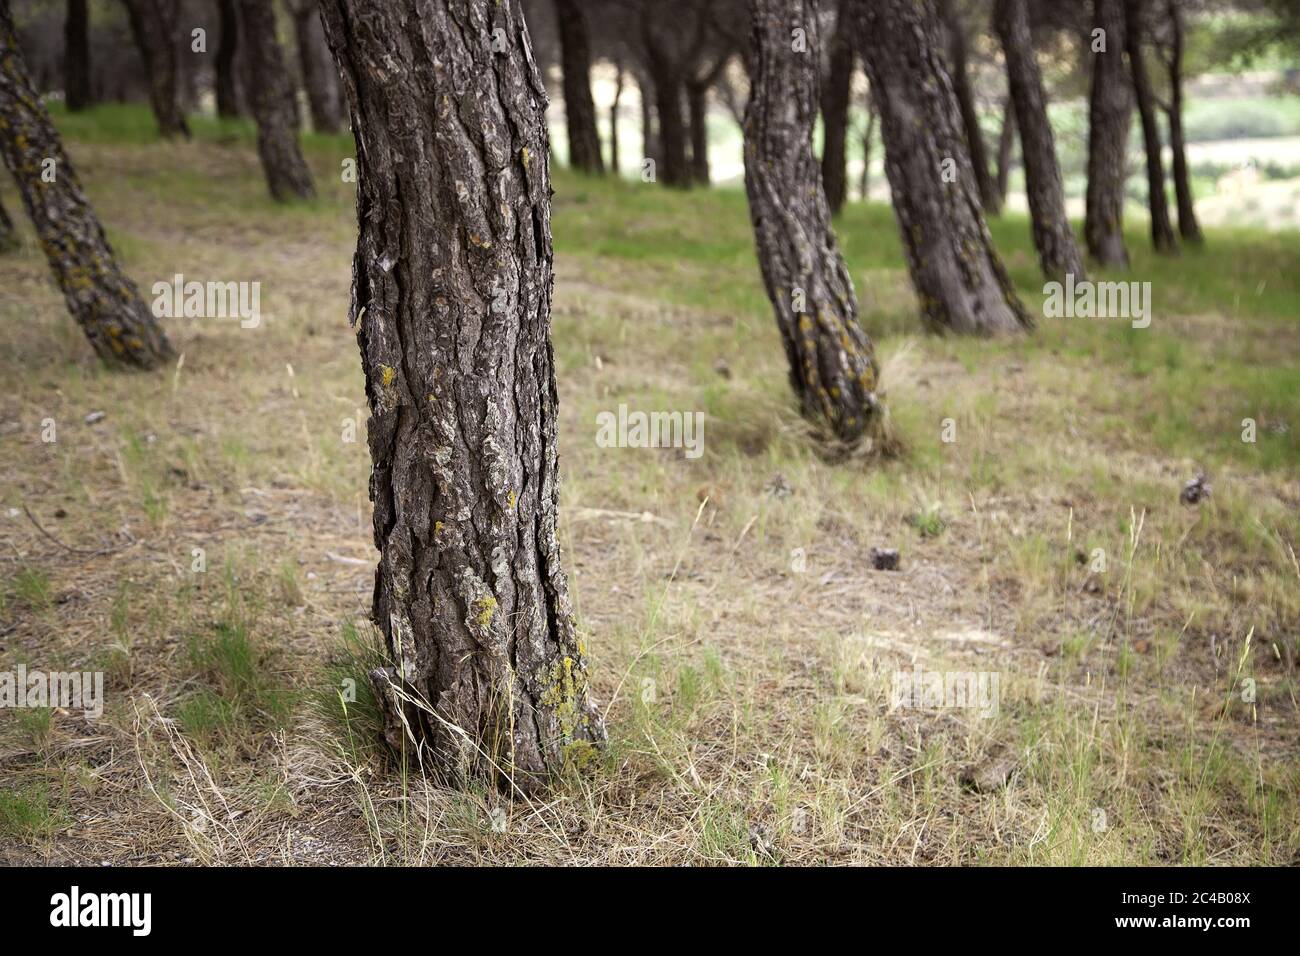 Lush forest with trees, detail of nature and freedom, natural beauty Stock Photo